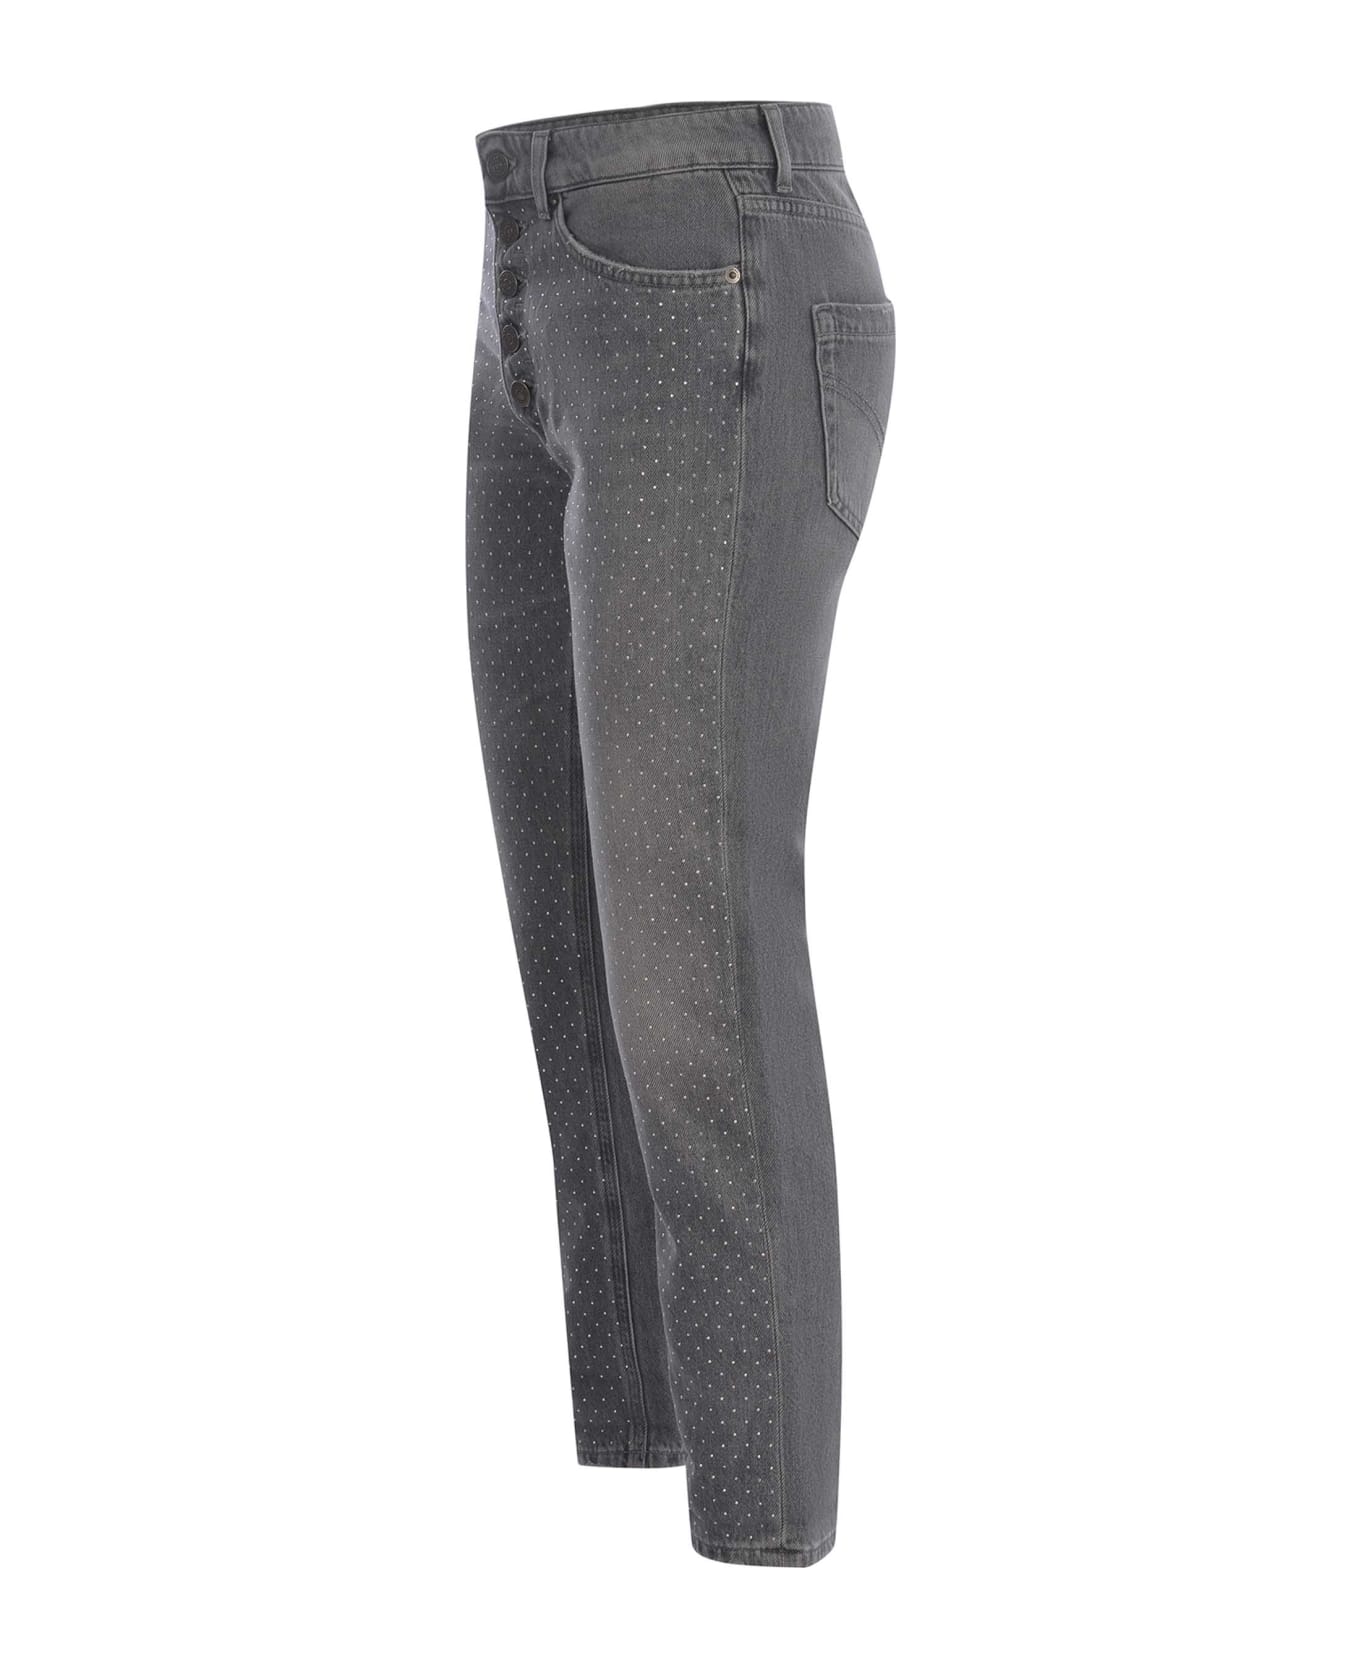 Dondup Cropped Dotted Jeans - Denim grigio